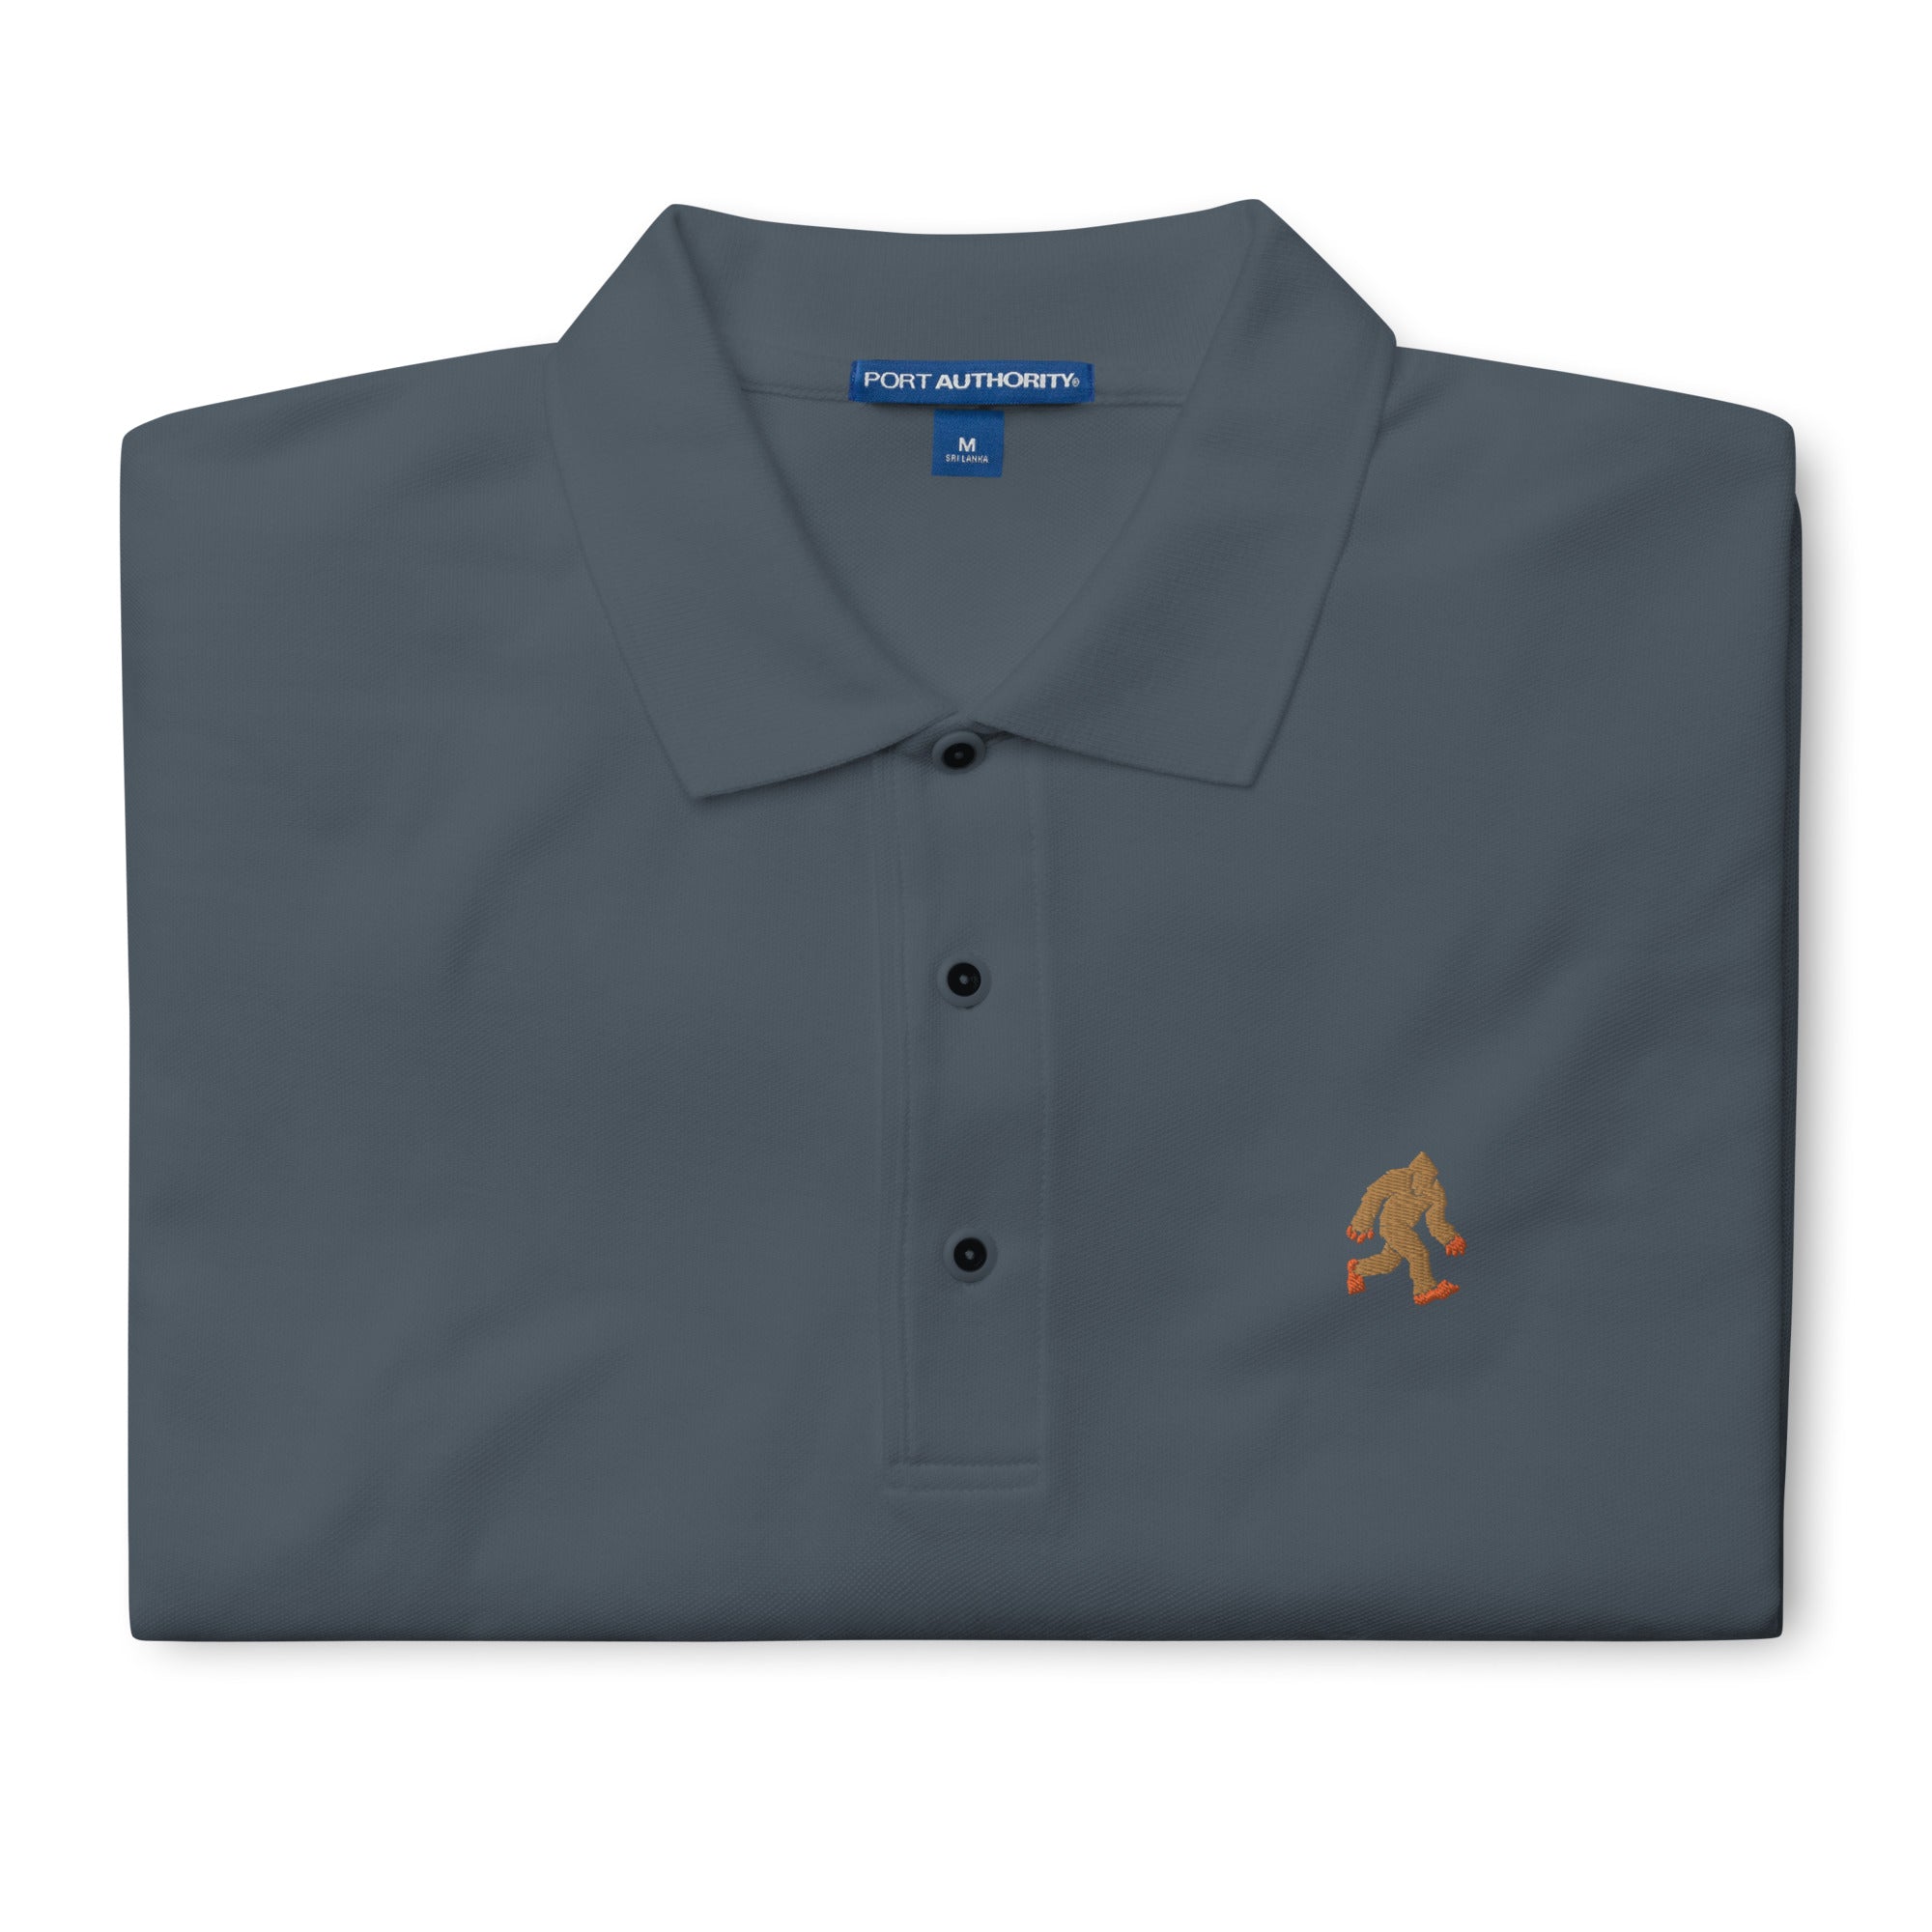 The Squatch Polo